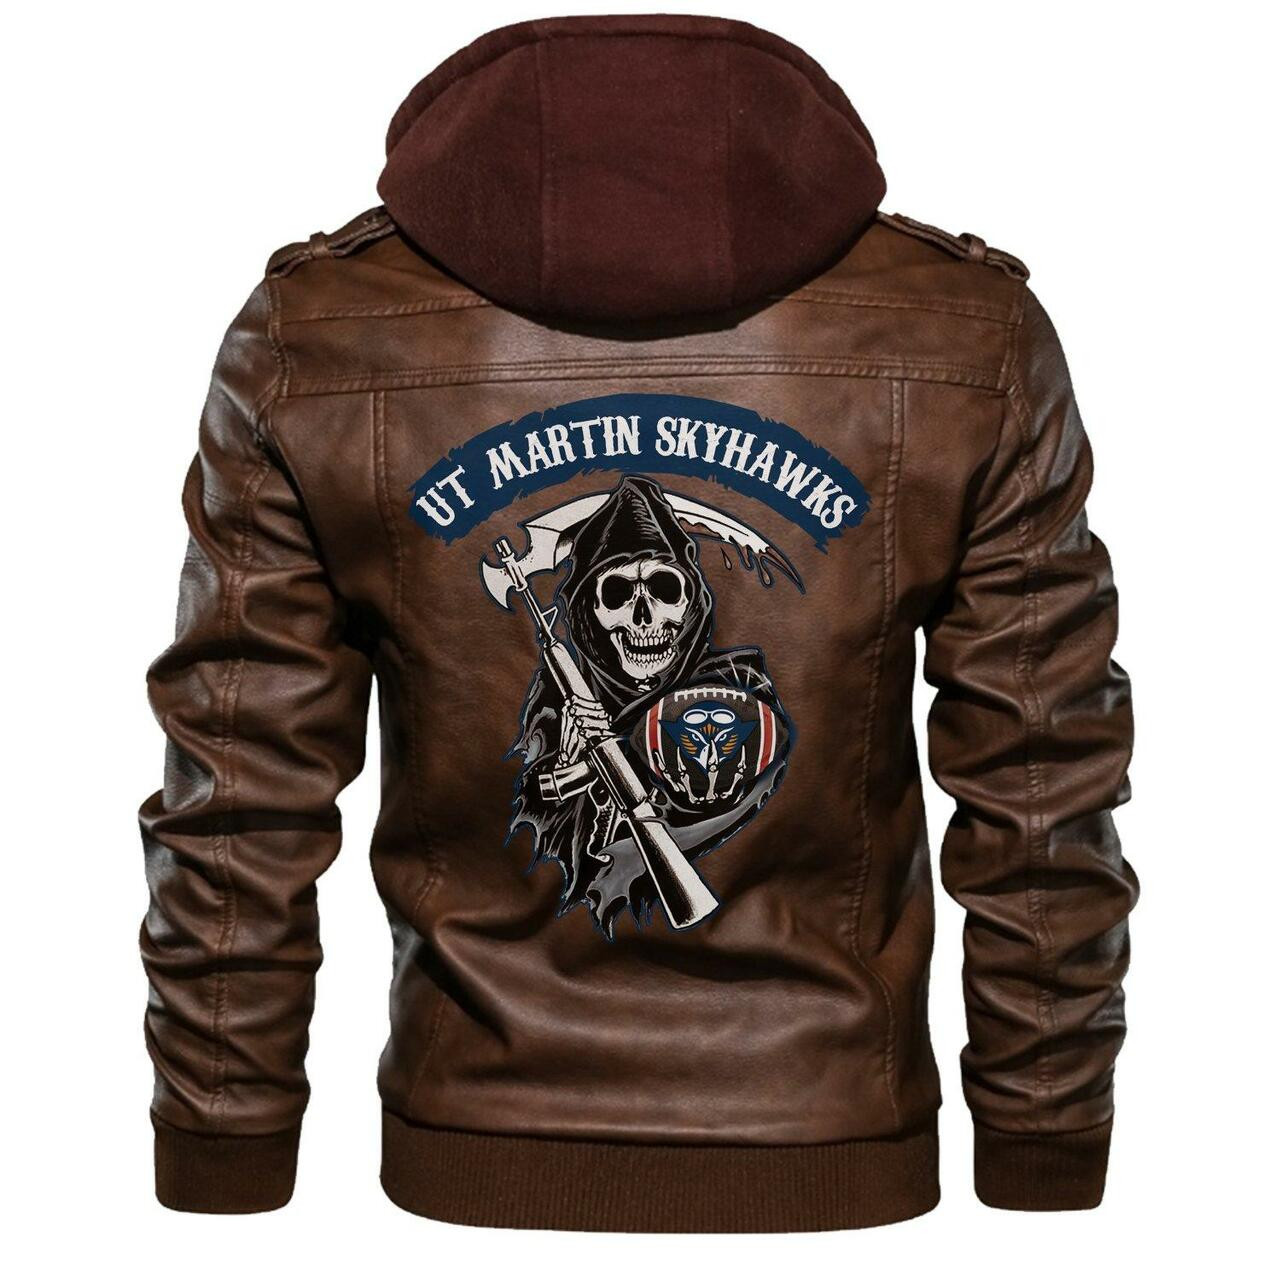 Check out and find the right leather jacket below 113